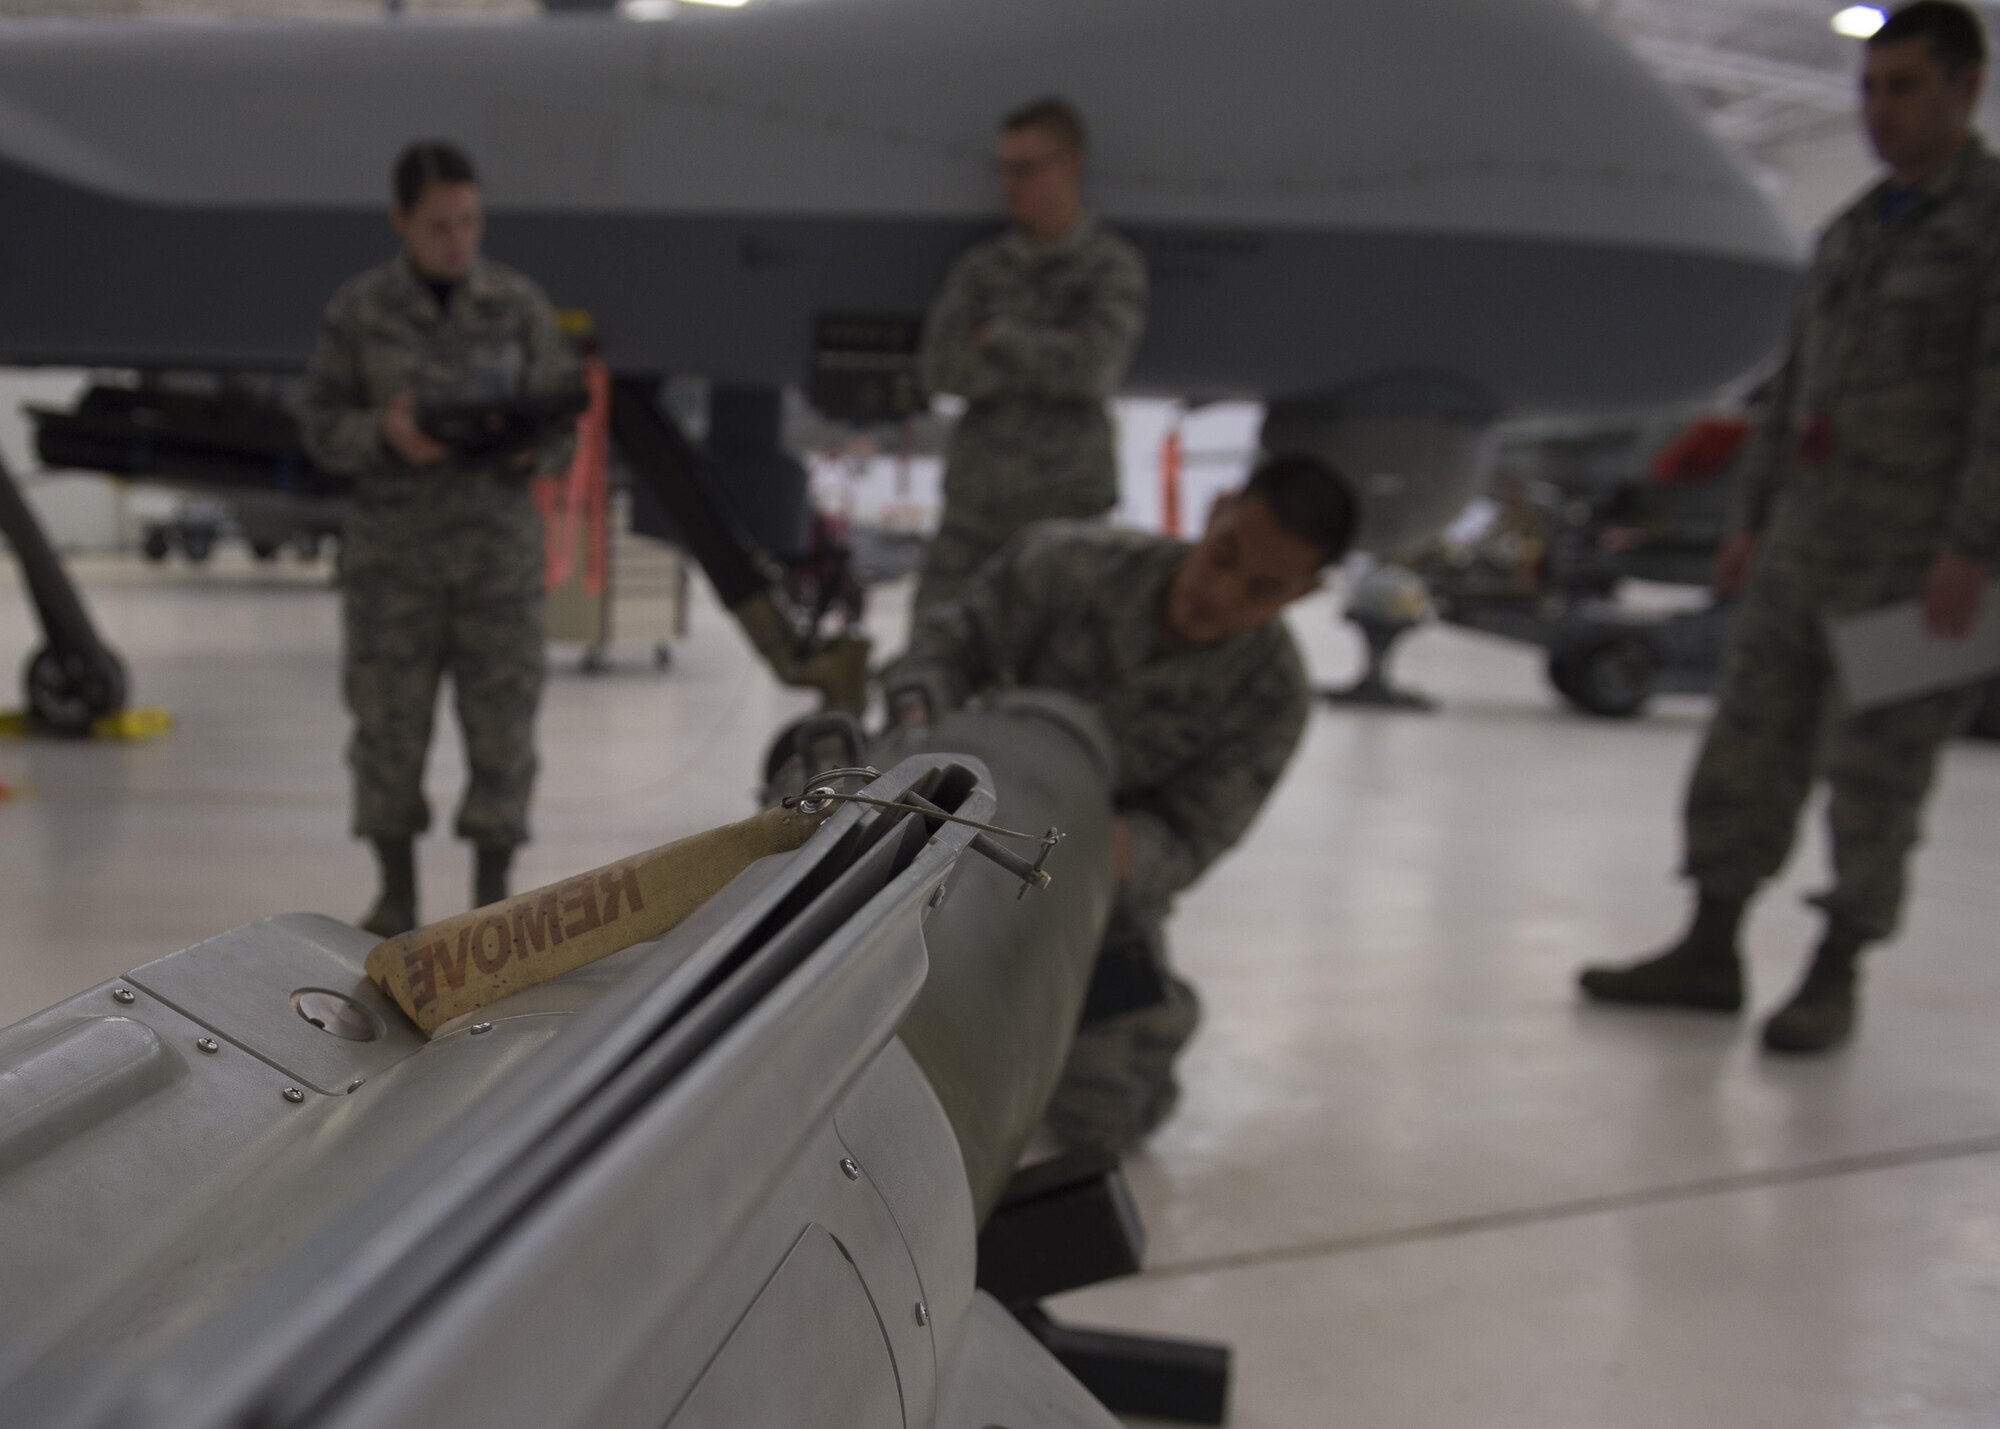 Members of the 49th Wing Maintenance Group inspect an inert munition before loading it onto an MQ-9 Reaper during a quarterly load crew competition at Holloman Air Force Base, N.M., Jan. 20, 2016. The weapons load crews for German Air Force Tornado, F-16 Fighting Falcon and MQ-9 Reaper competed against each other to load weapons the most efficiently and with the least amount of procedural errors. Points for the competition are awarded based on weapons loading, tool kit inspection and uniform inspection categories. (U.S. Air Force photo by Senior Airman Chase Cannon/ Released)